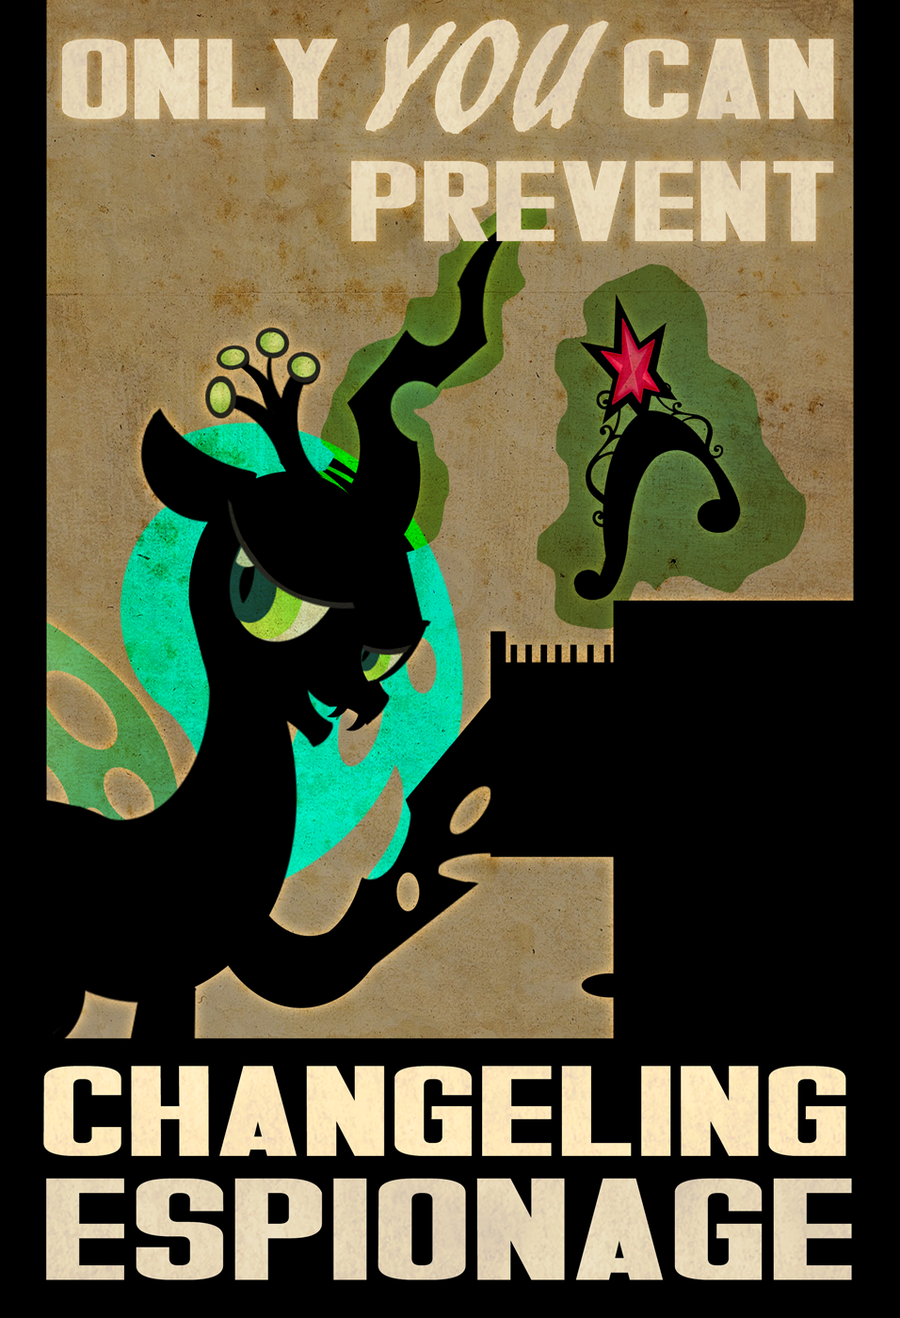 [Bild: changling_espionage_by_pixelkitties-d4ycsy7.png]